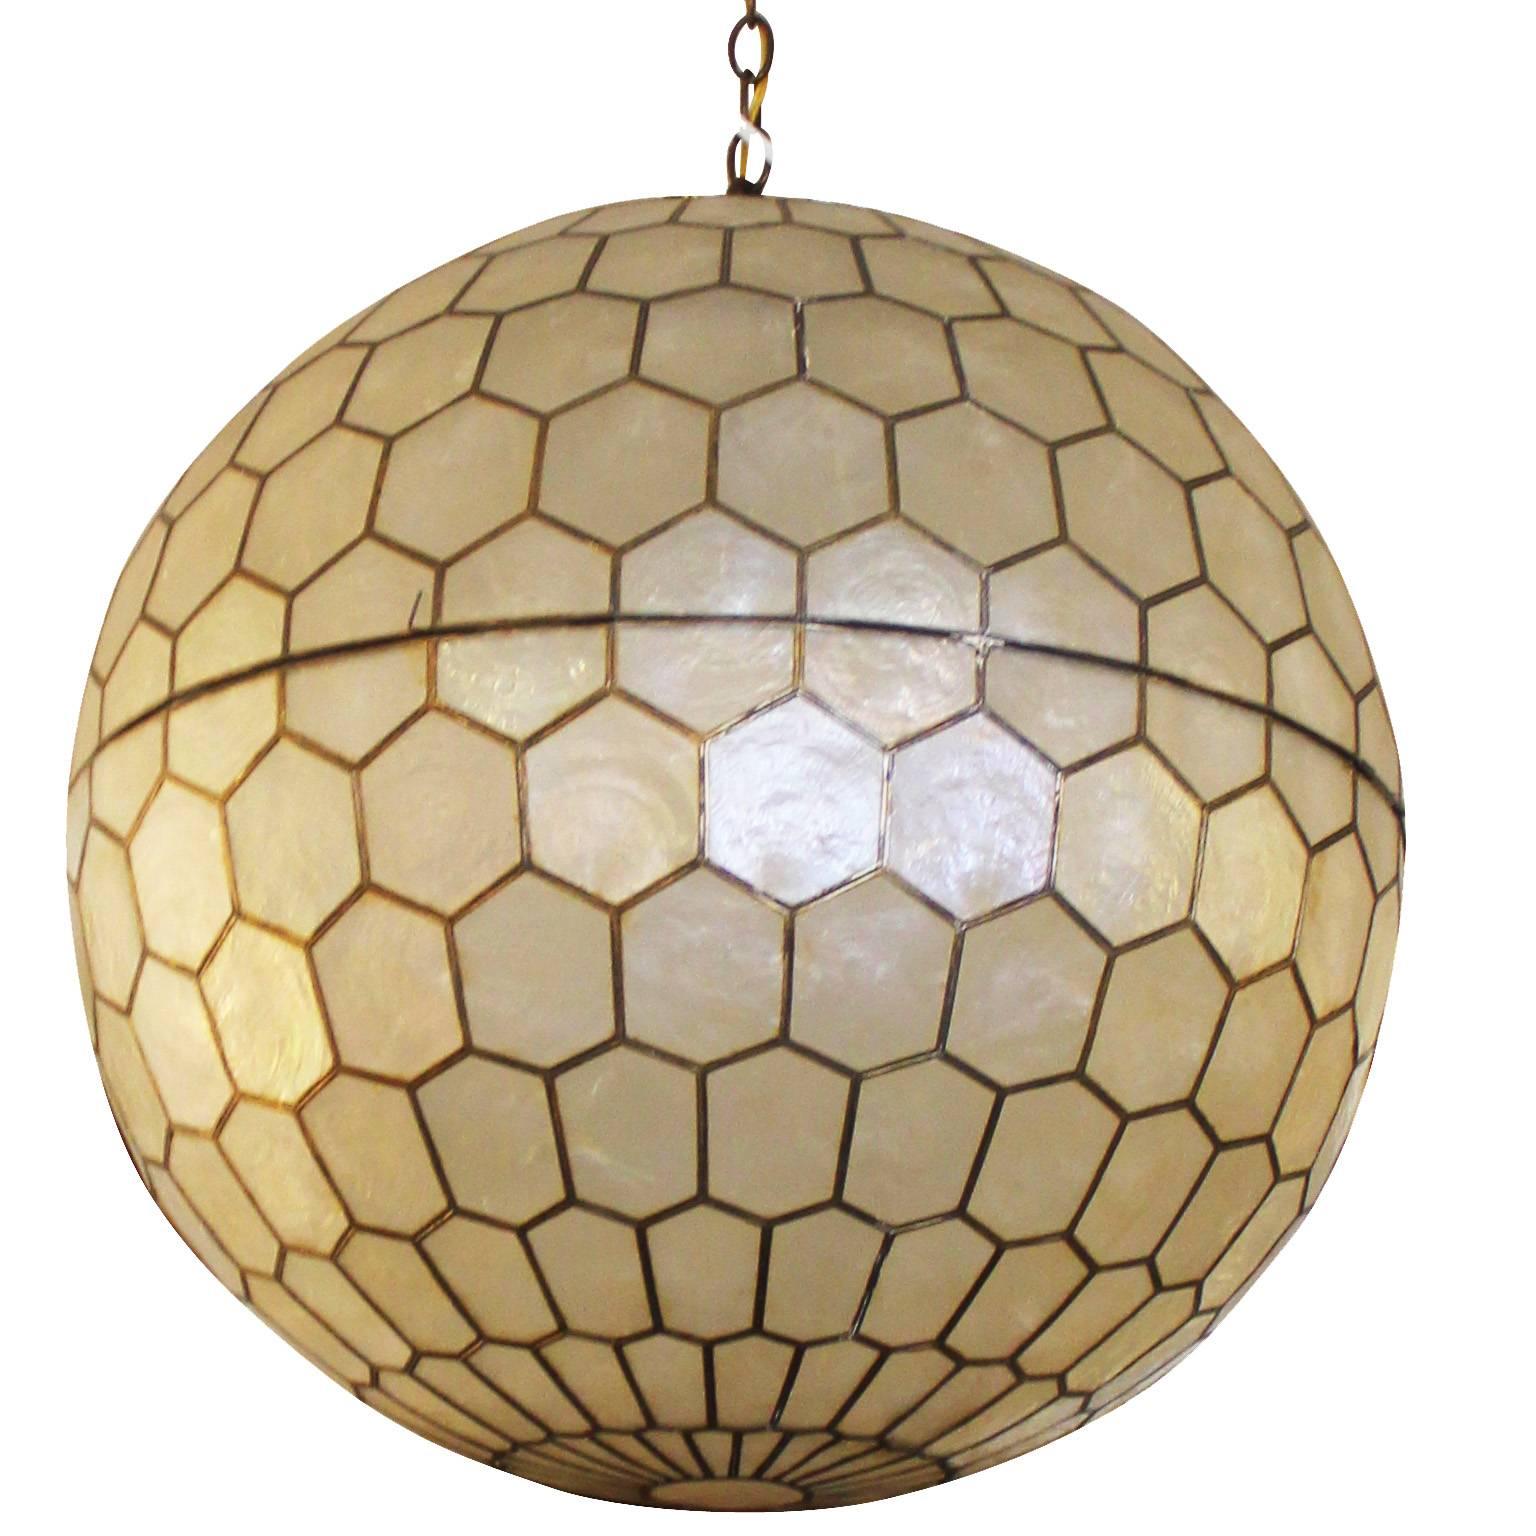 Architectural ball or globe chandelier by Feldman. Geometric panels of capiz shell fixed with brass give form to the piece. Fixture opens in the middle to access light bulb.